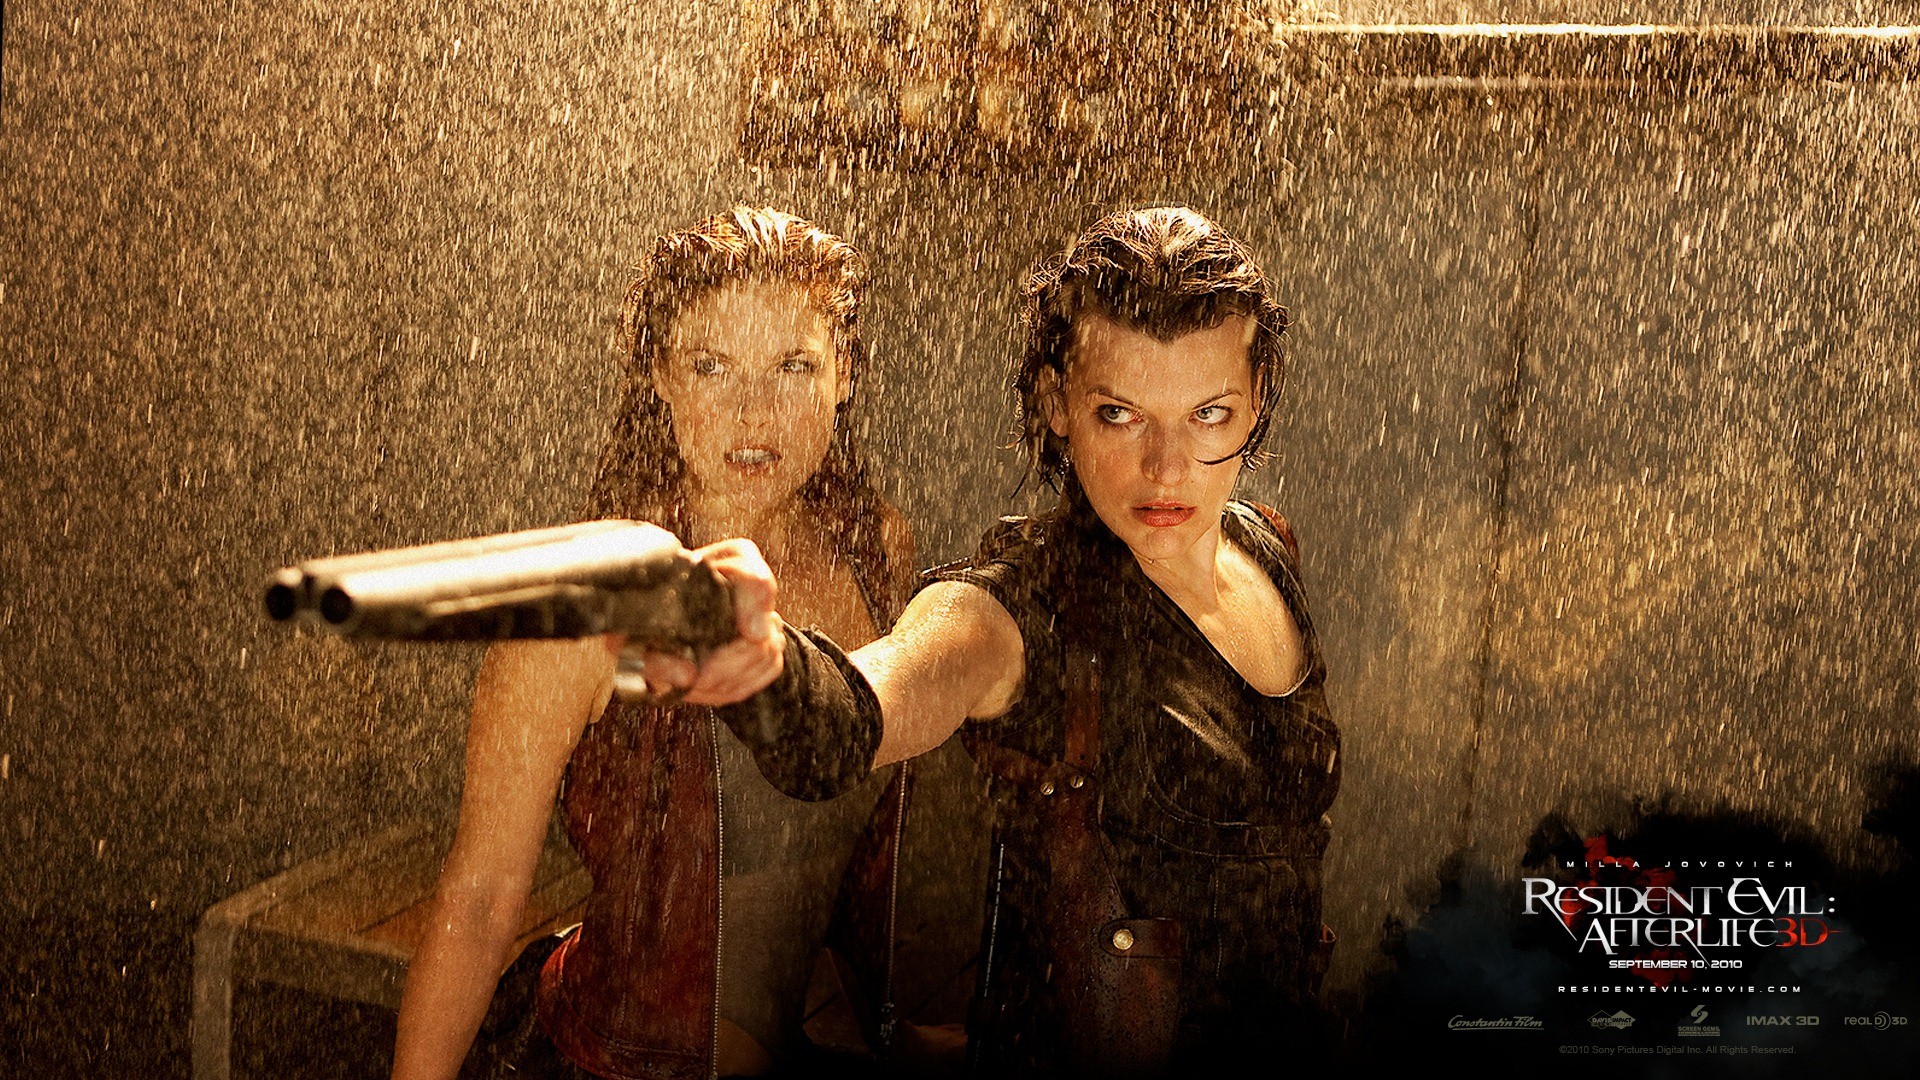 1920x1080 81 Resident Evil: Retribution HD Wallpapers | Backgrounds